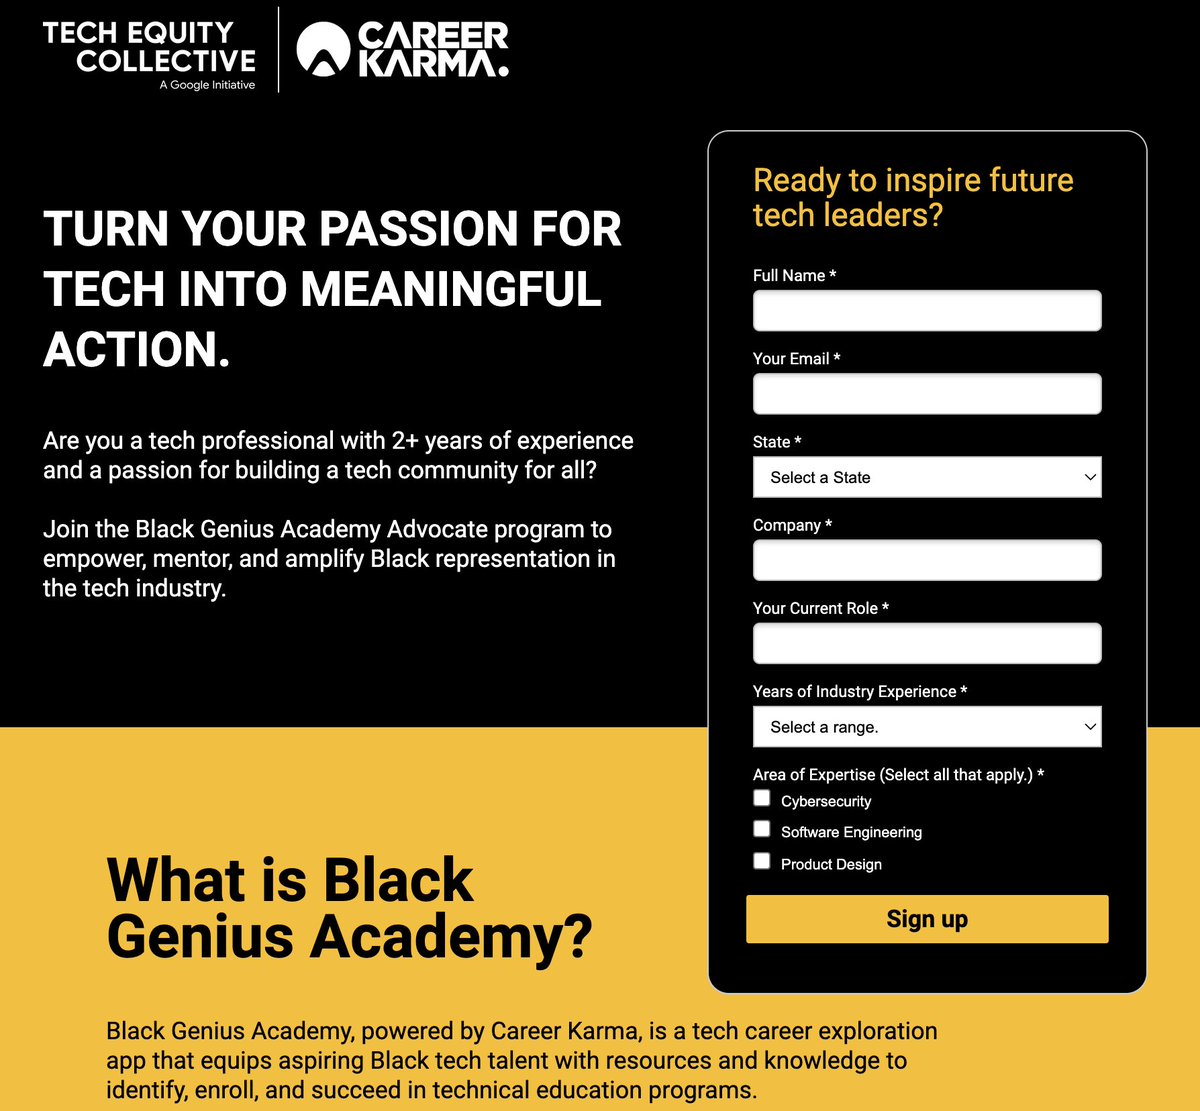 Happy Thursday, now that we have thousands of people signed up to Black Genius Academy, we announced our BGA Advocates program at the Google Cloud Next Conference last week and have hundreds of people signing up bgaadvocates.careerkarma.com Are you a tech professional with 2+ years…